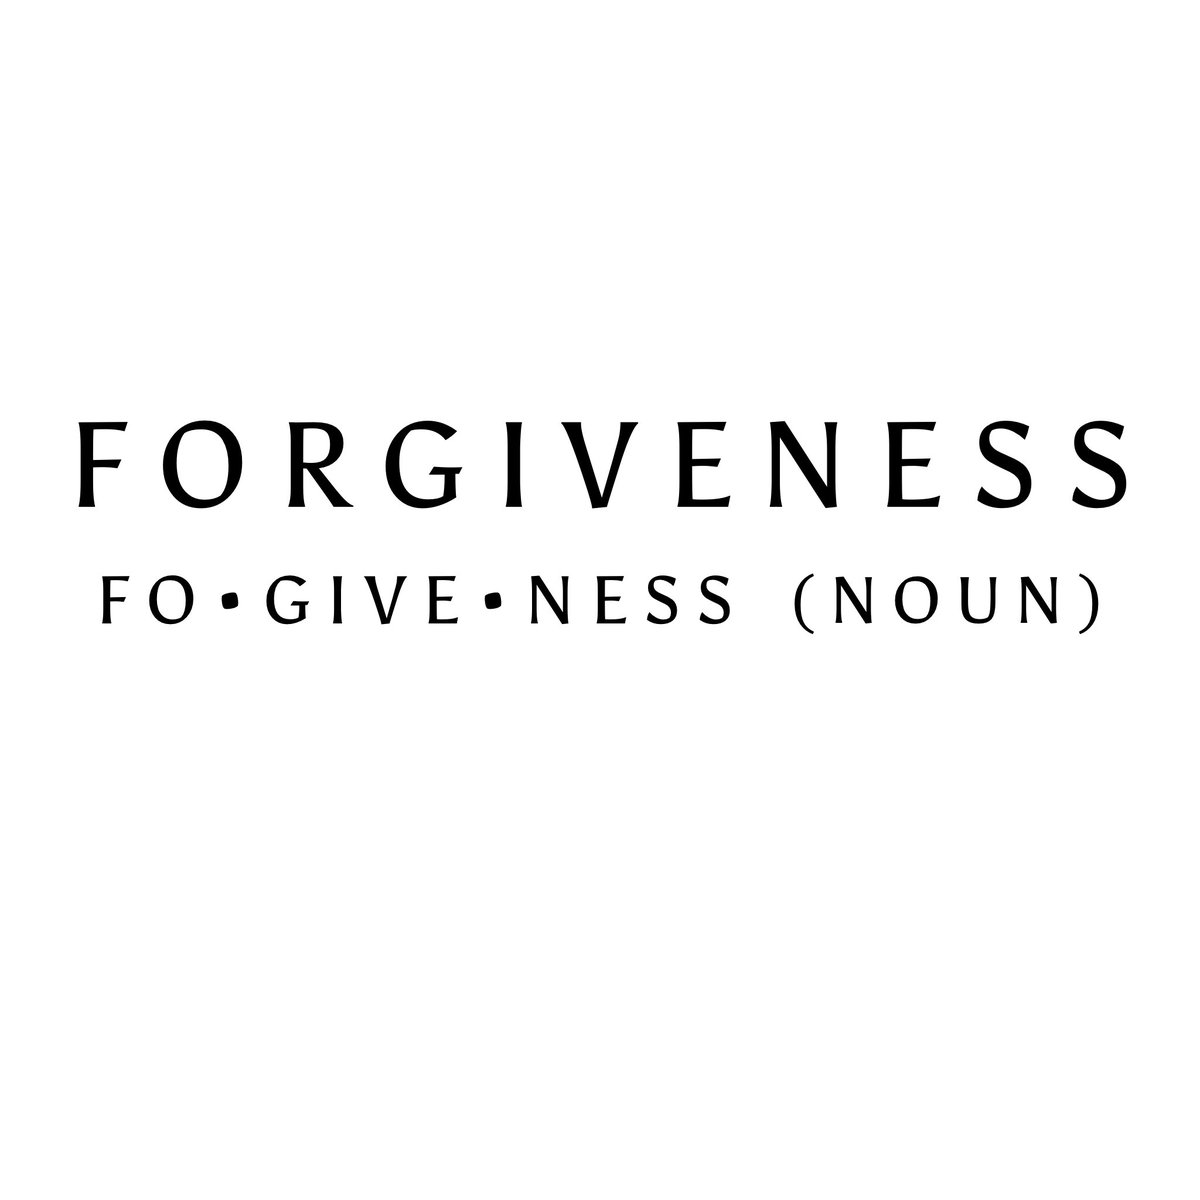 Master the art of forgiveness. Holding onto grudges only weighs down the journey together. Forgiveness isn't just a gift to your partner, it's a gift to yourself, freeing you both to move forward with love and understanding. #MarriageHacks #Forgiveness